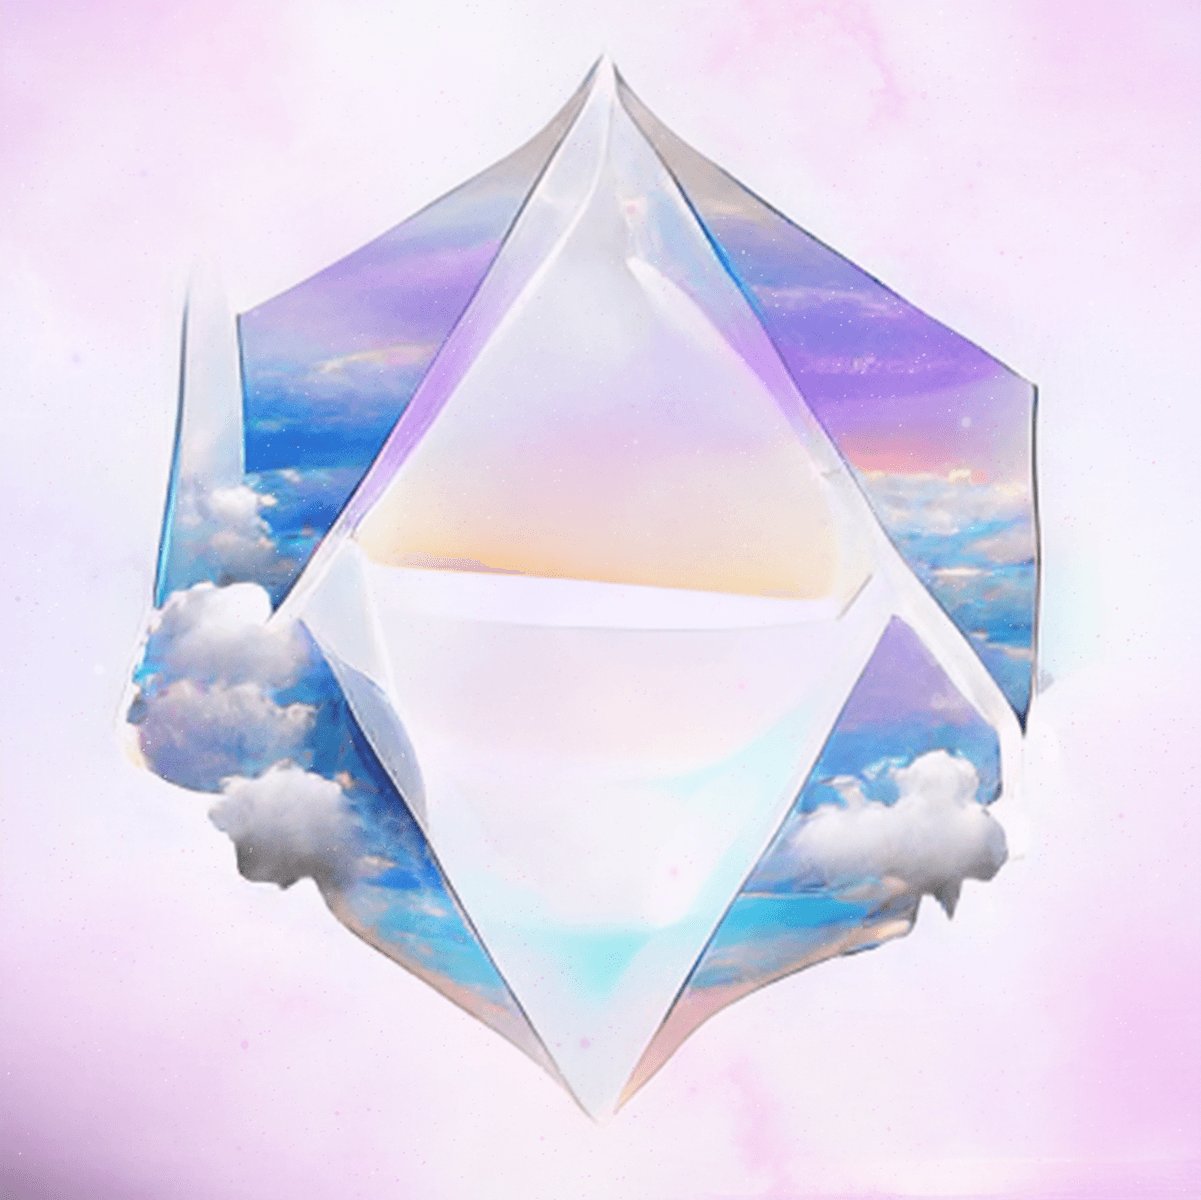 ETHEREUM DREAMS ON CRYSTAL CLOUDS